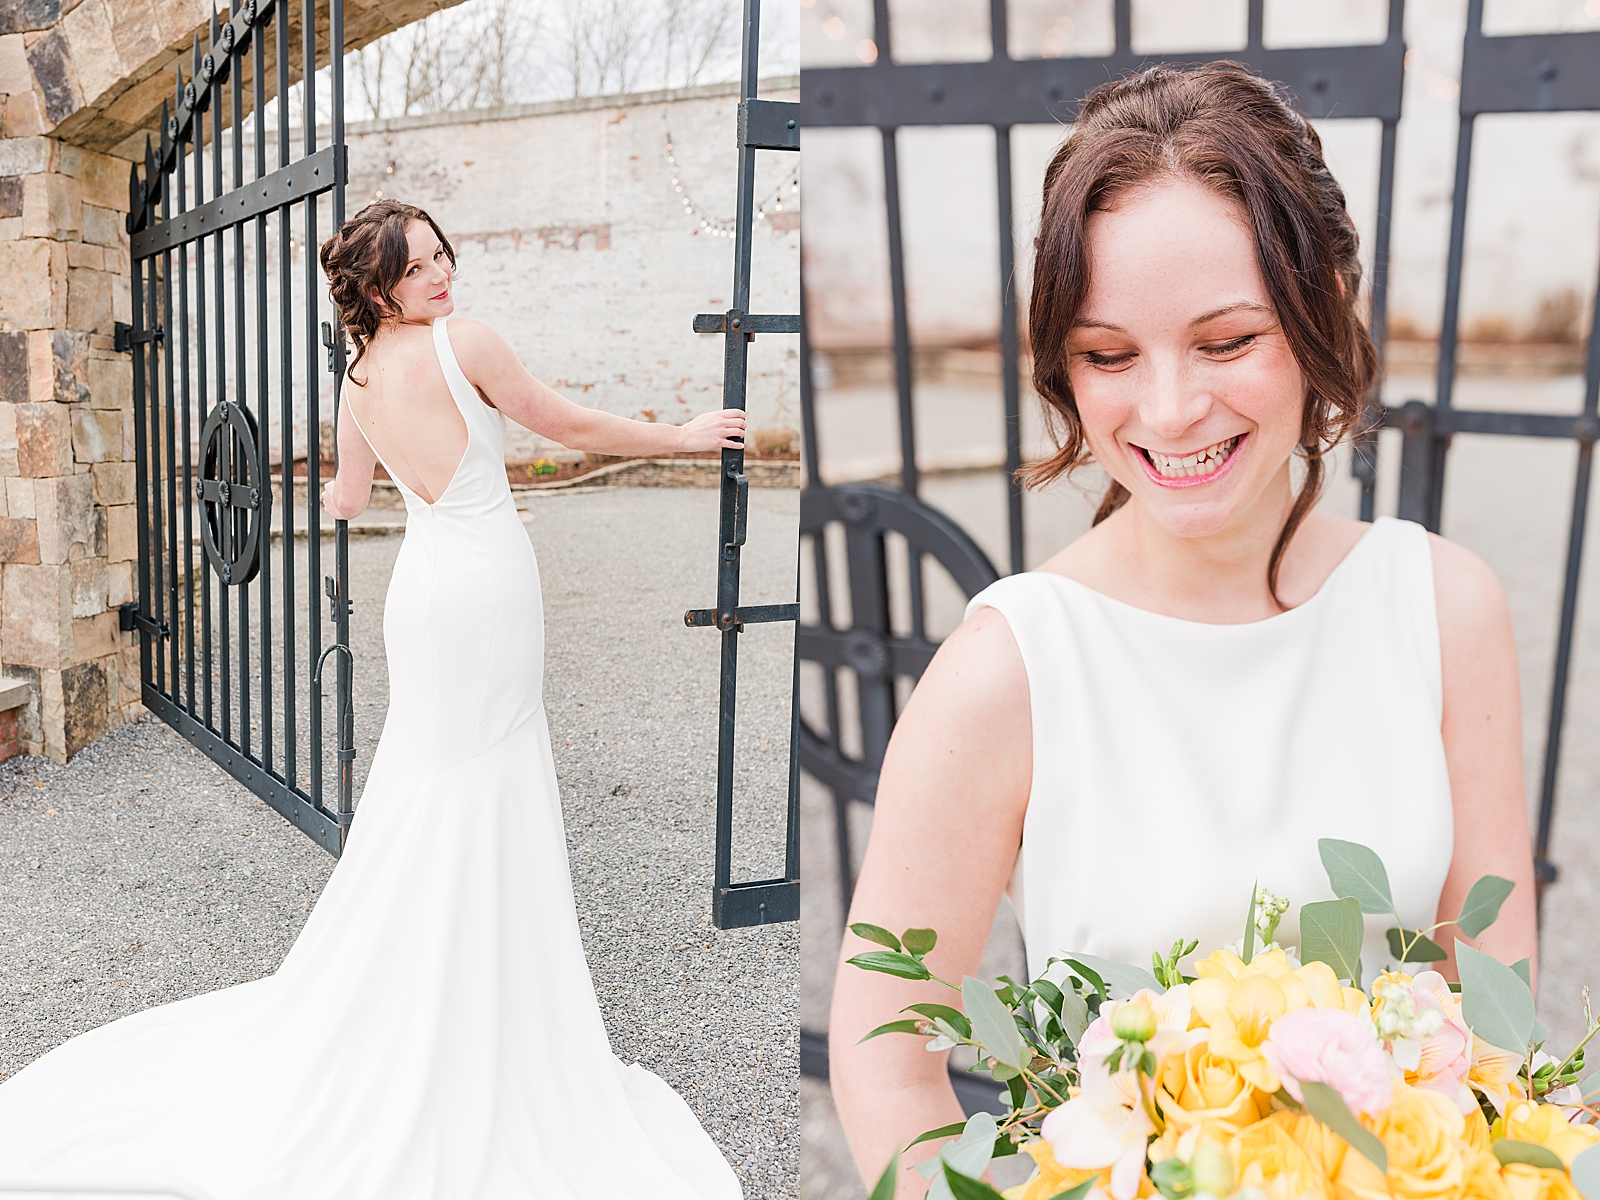 Hackney Warehouse Spring Bridal Session Bride smiling in front of gates Photos